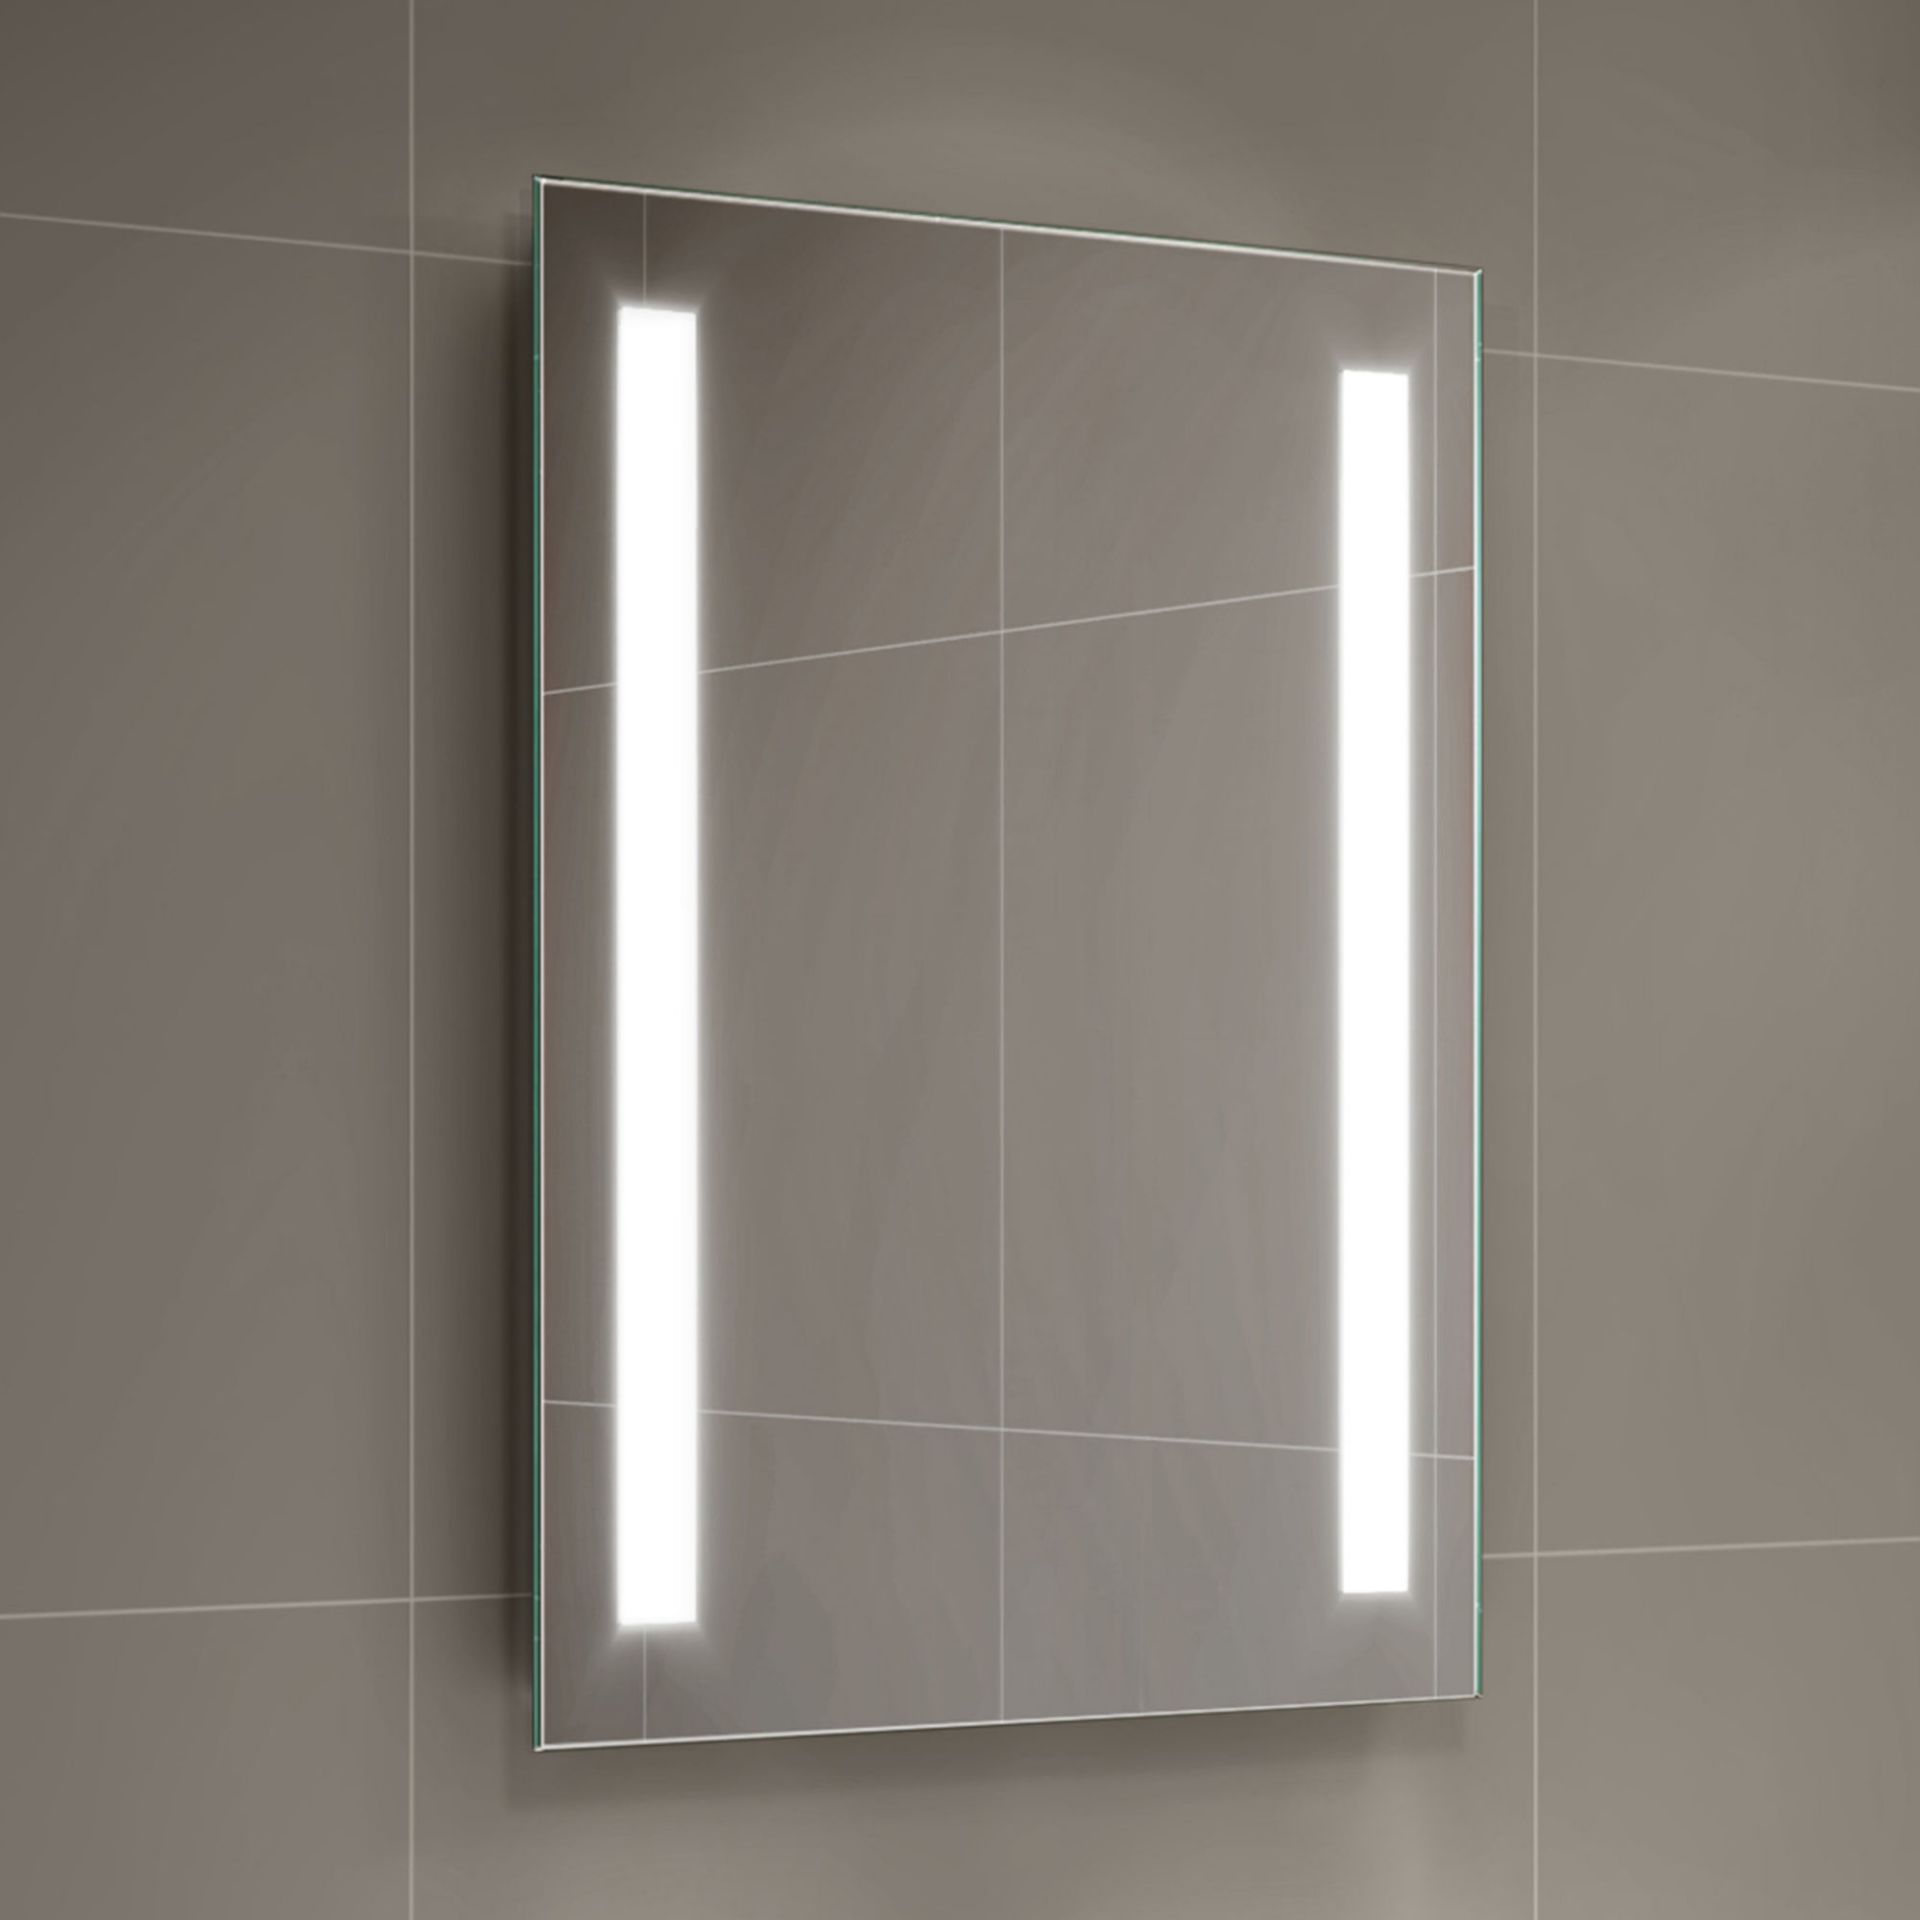 (TY264) 500x700mm Omega Illuminated LED Mirror - Battery Operated. Energy saving controlled On / Off